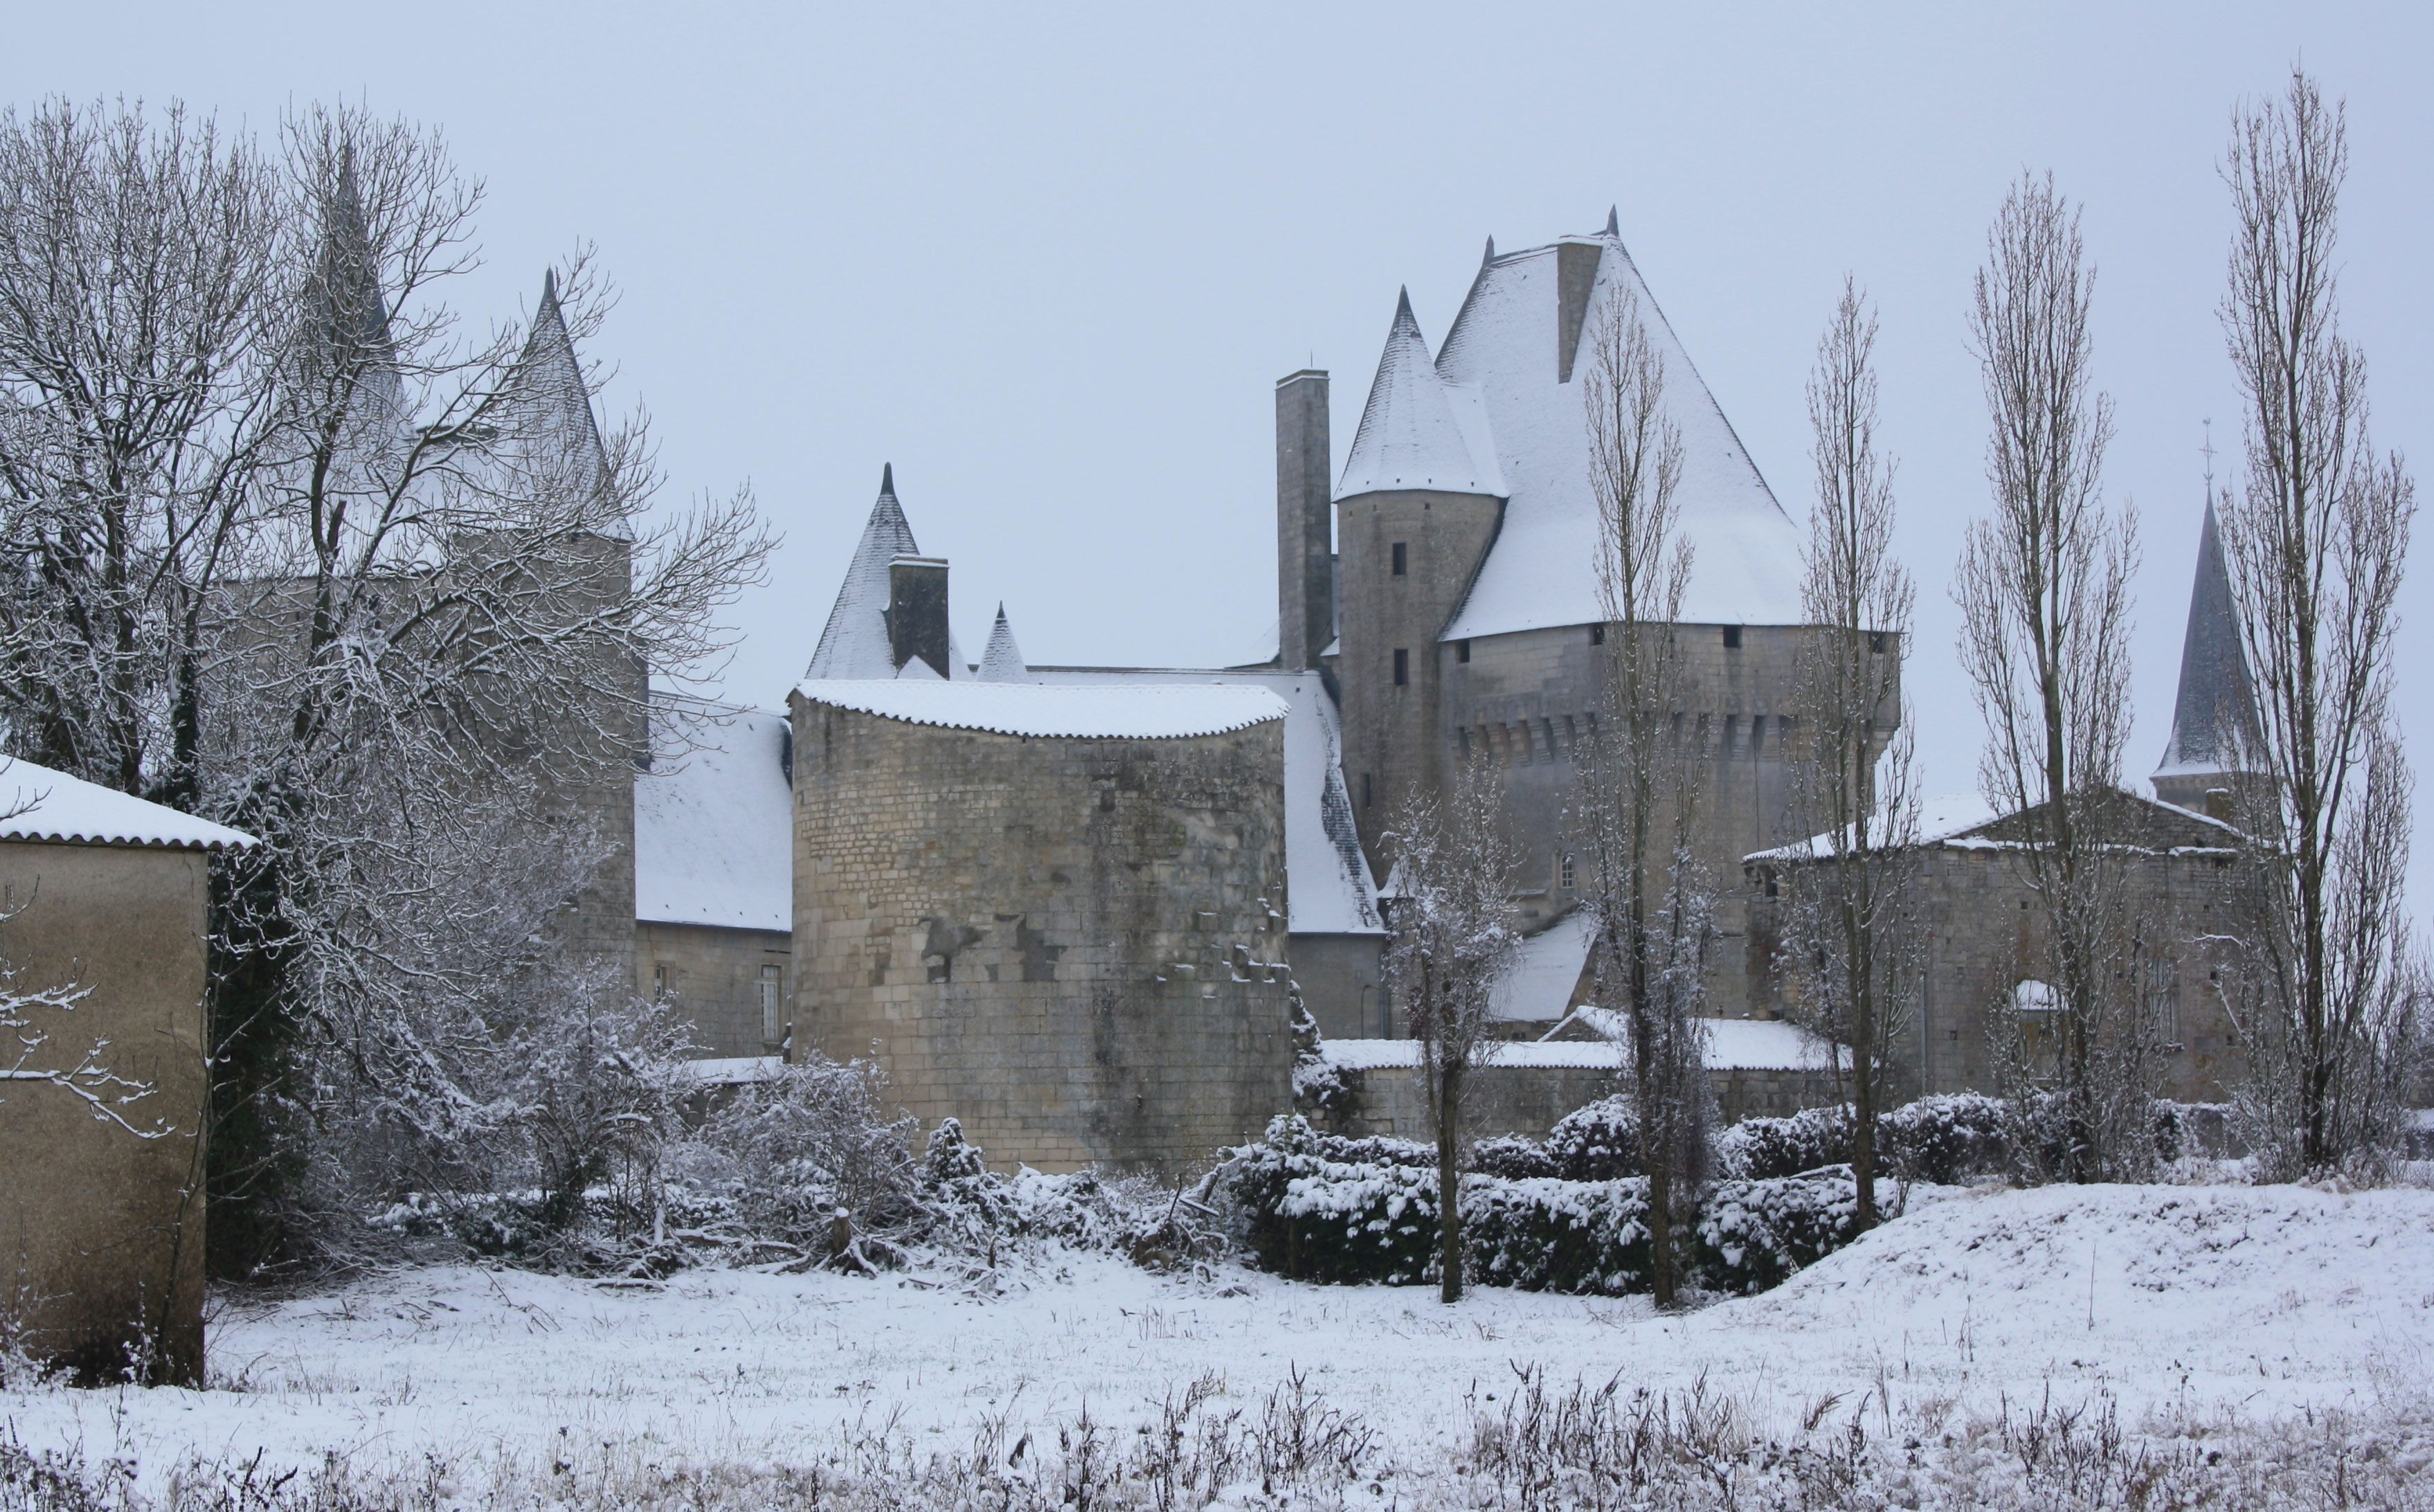 west side of the castle under the snow 